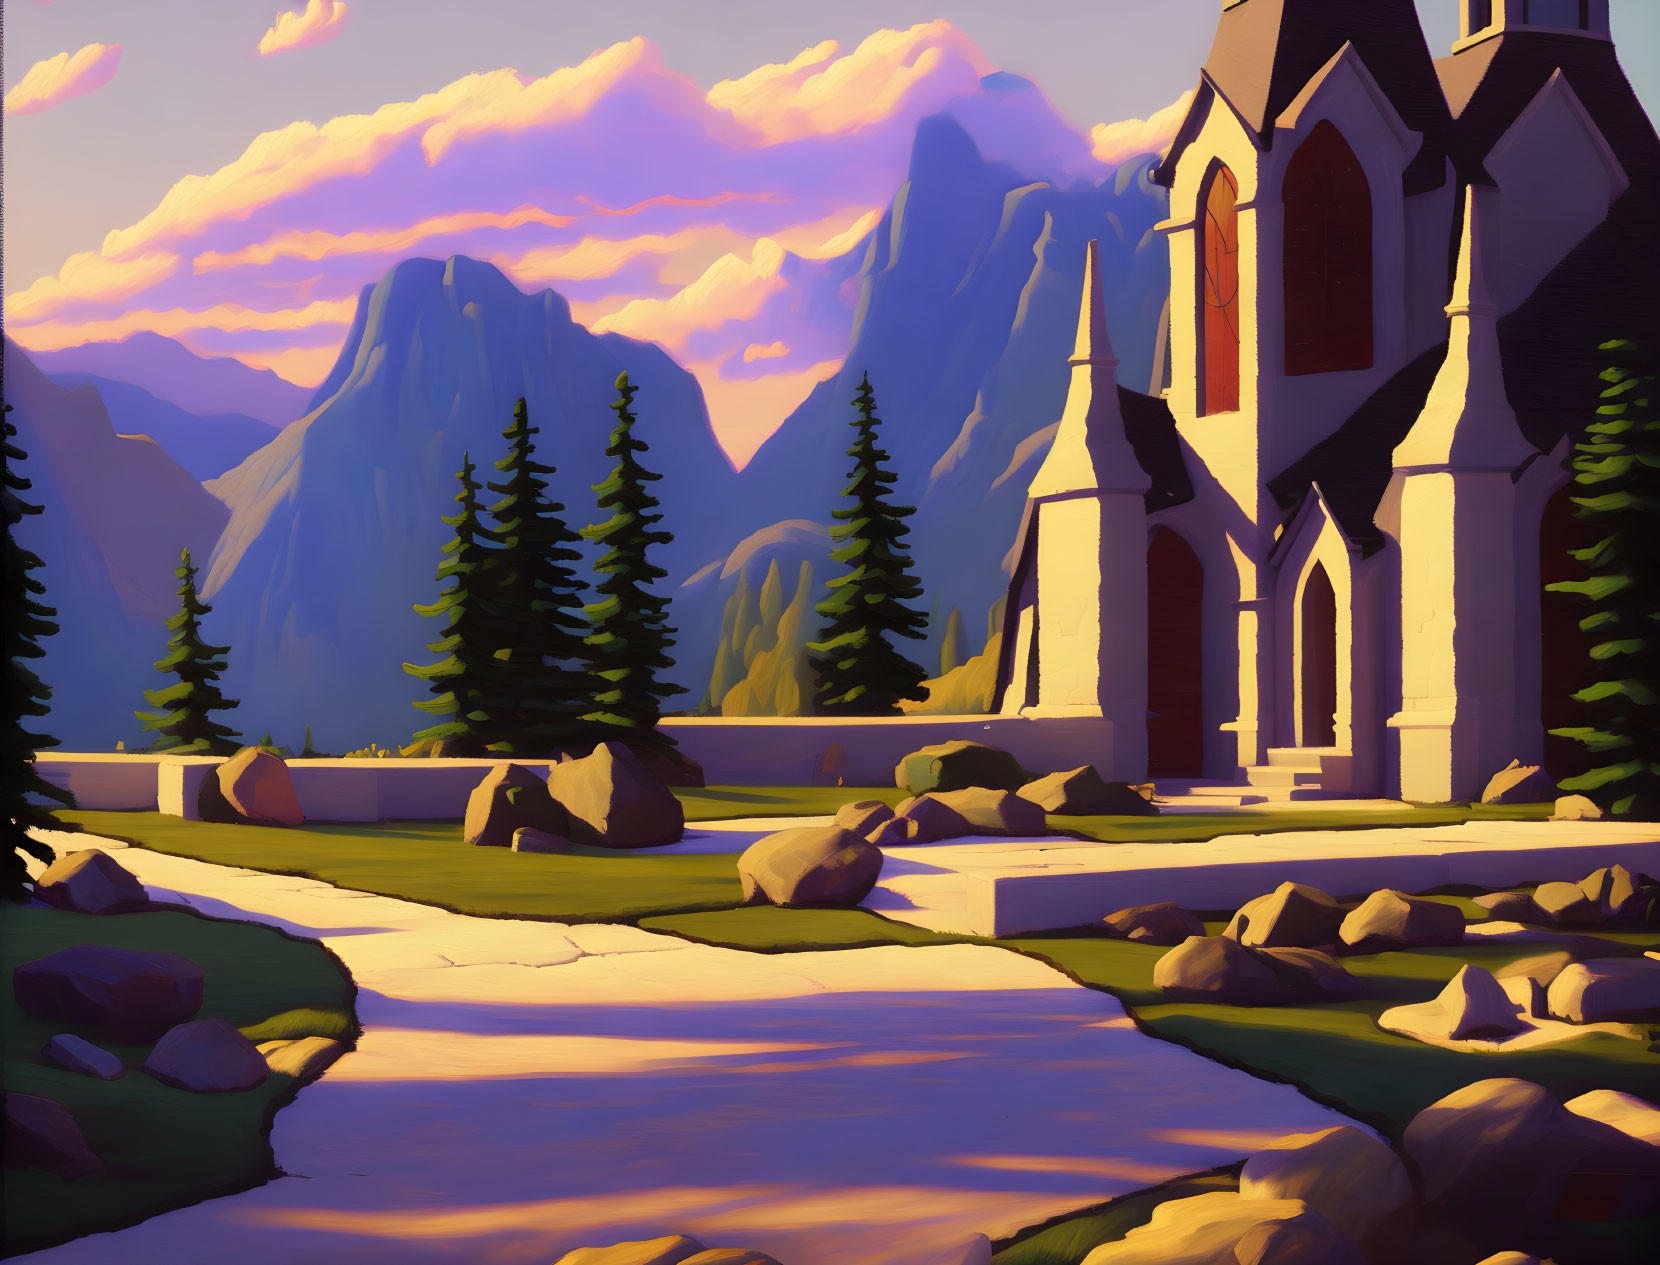 Stylized church with spires in mountain landscape at sunset